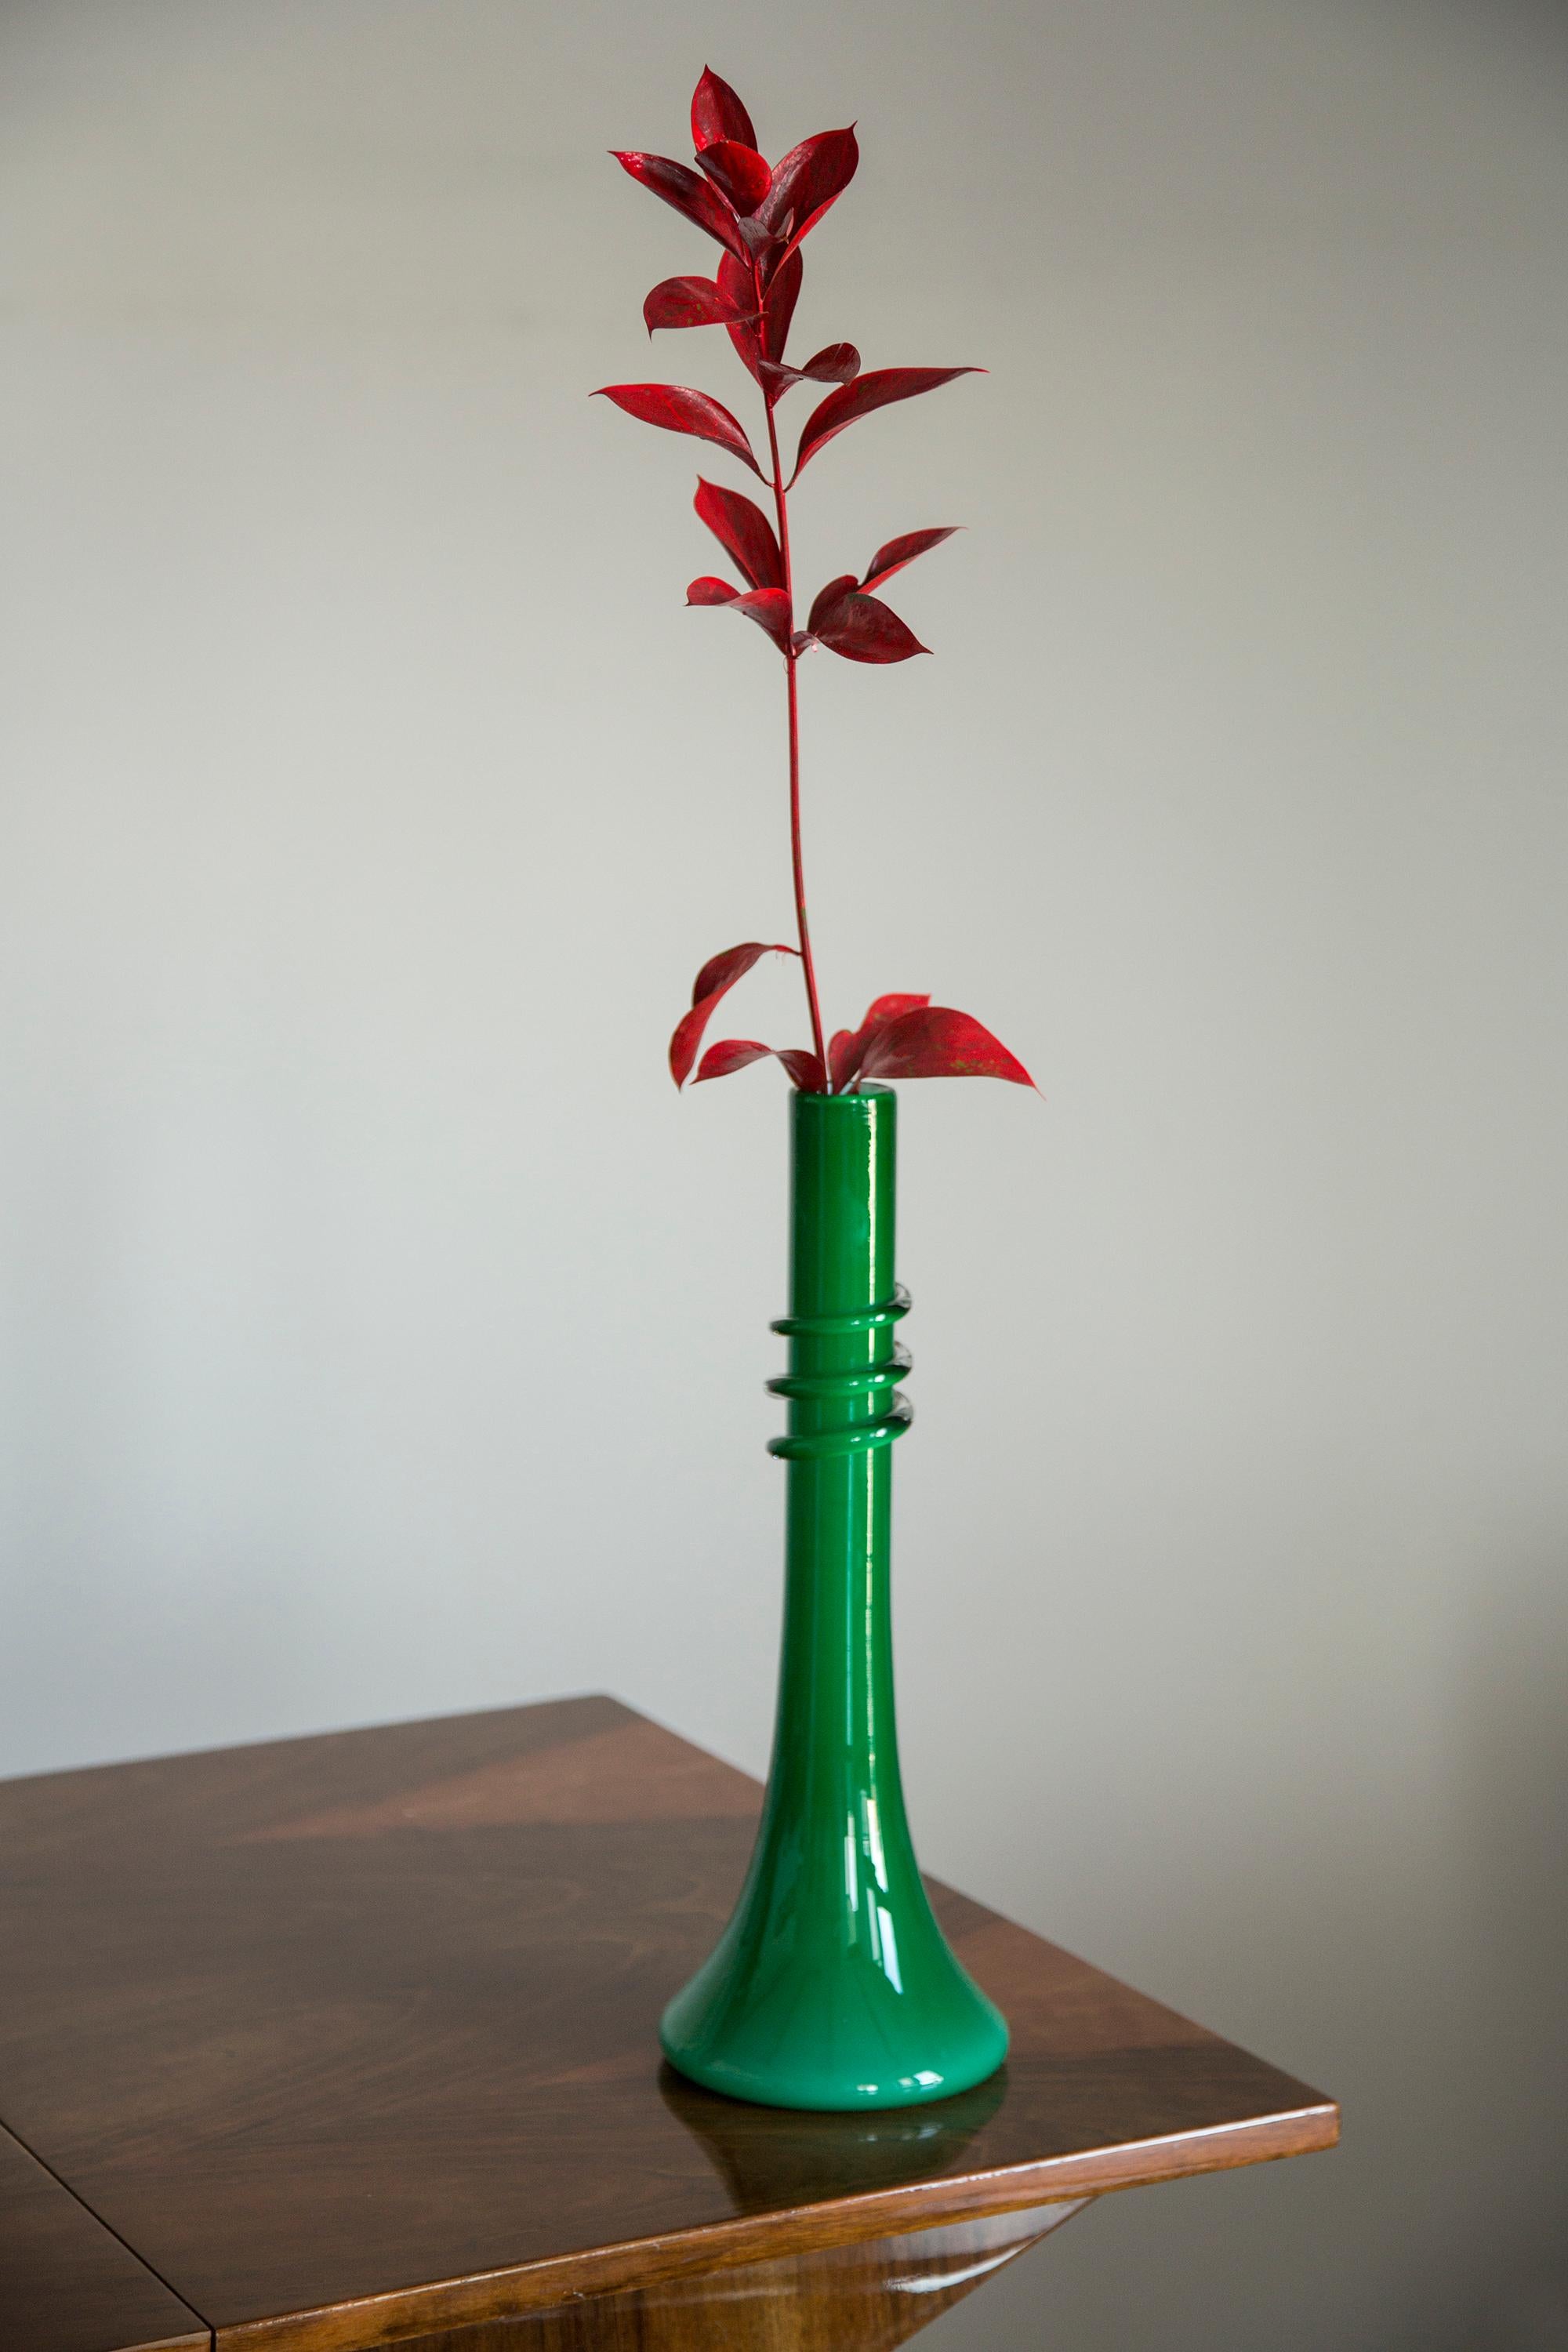 Vase formed by hand using traditional metallurgical technique. It was made of colored glass in a shade of green. The surface of the object with vertical grooves, which in the middle part change direction, merge and merge, giving a decorative effect.